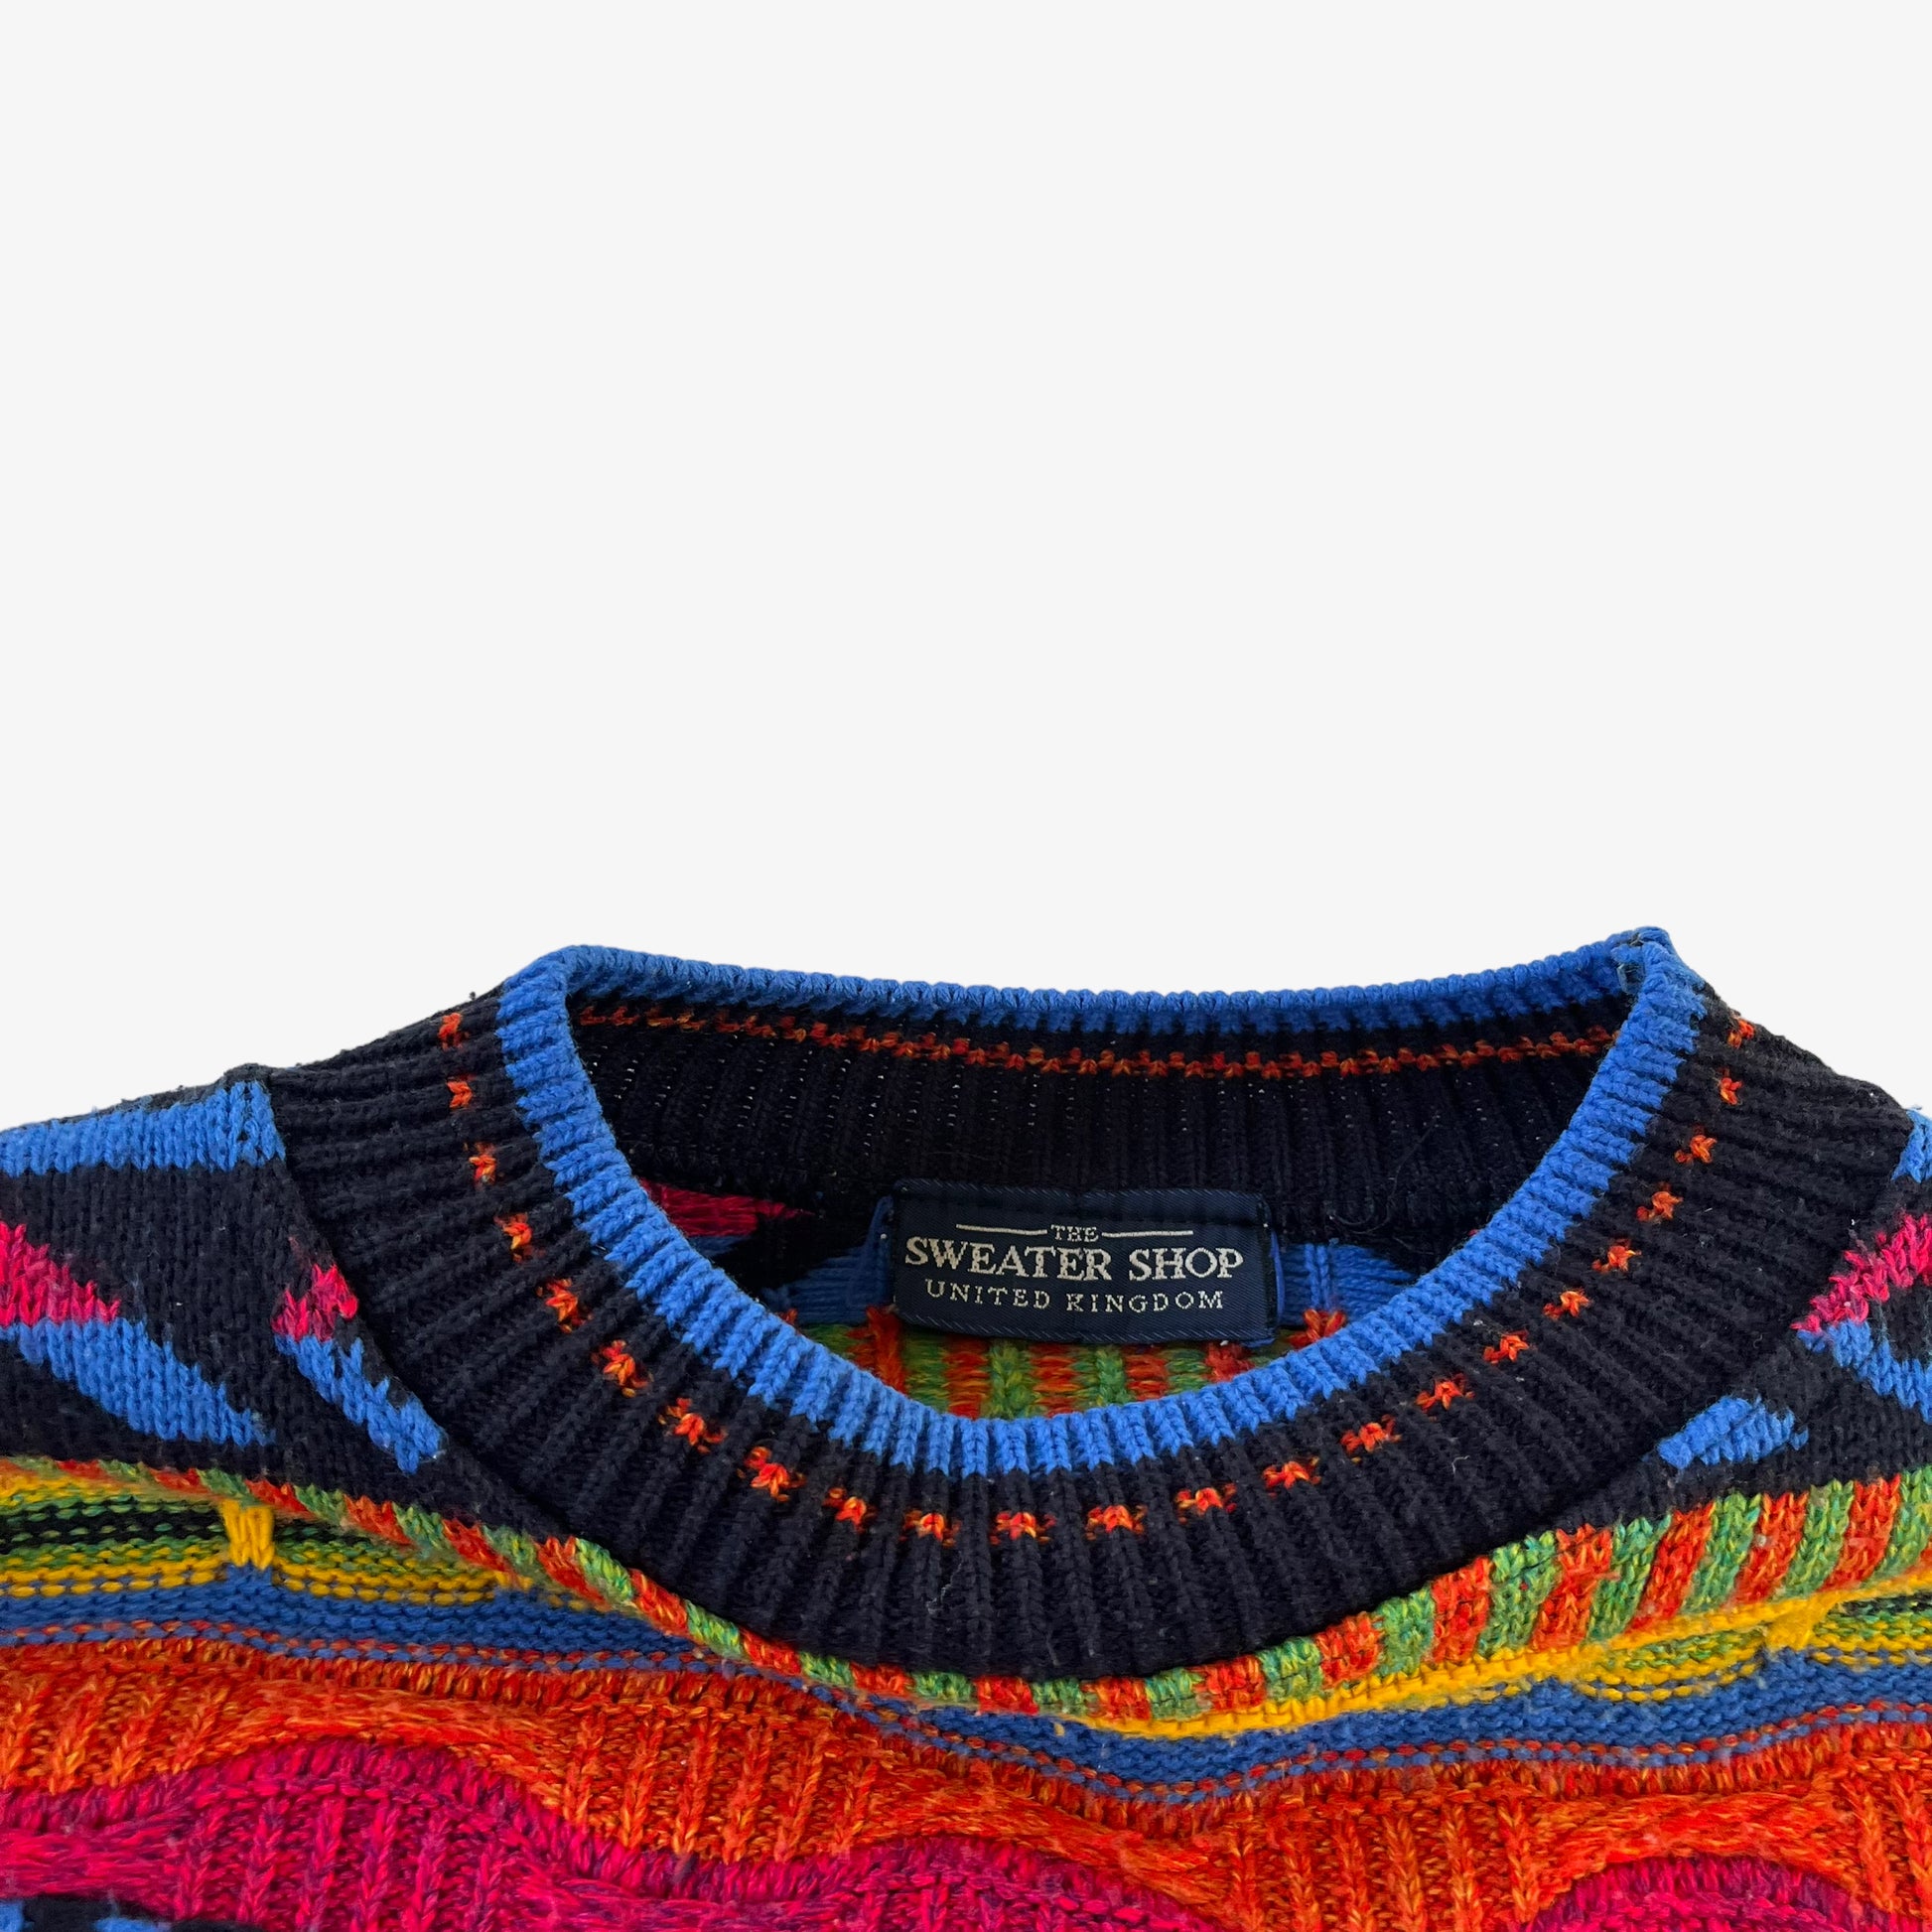 Vintage 90s The Sweater Shop 3D Textured Colourful Knitted Jumper Label - Casspios Dream